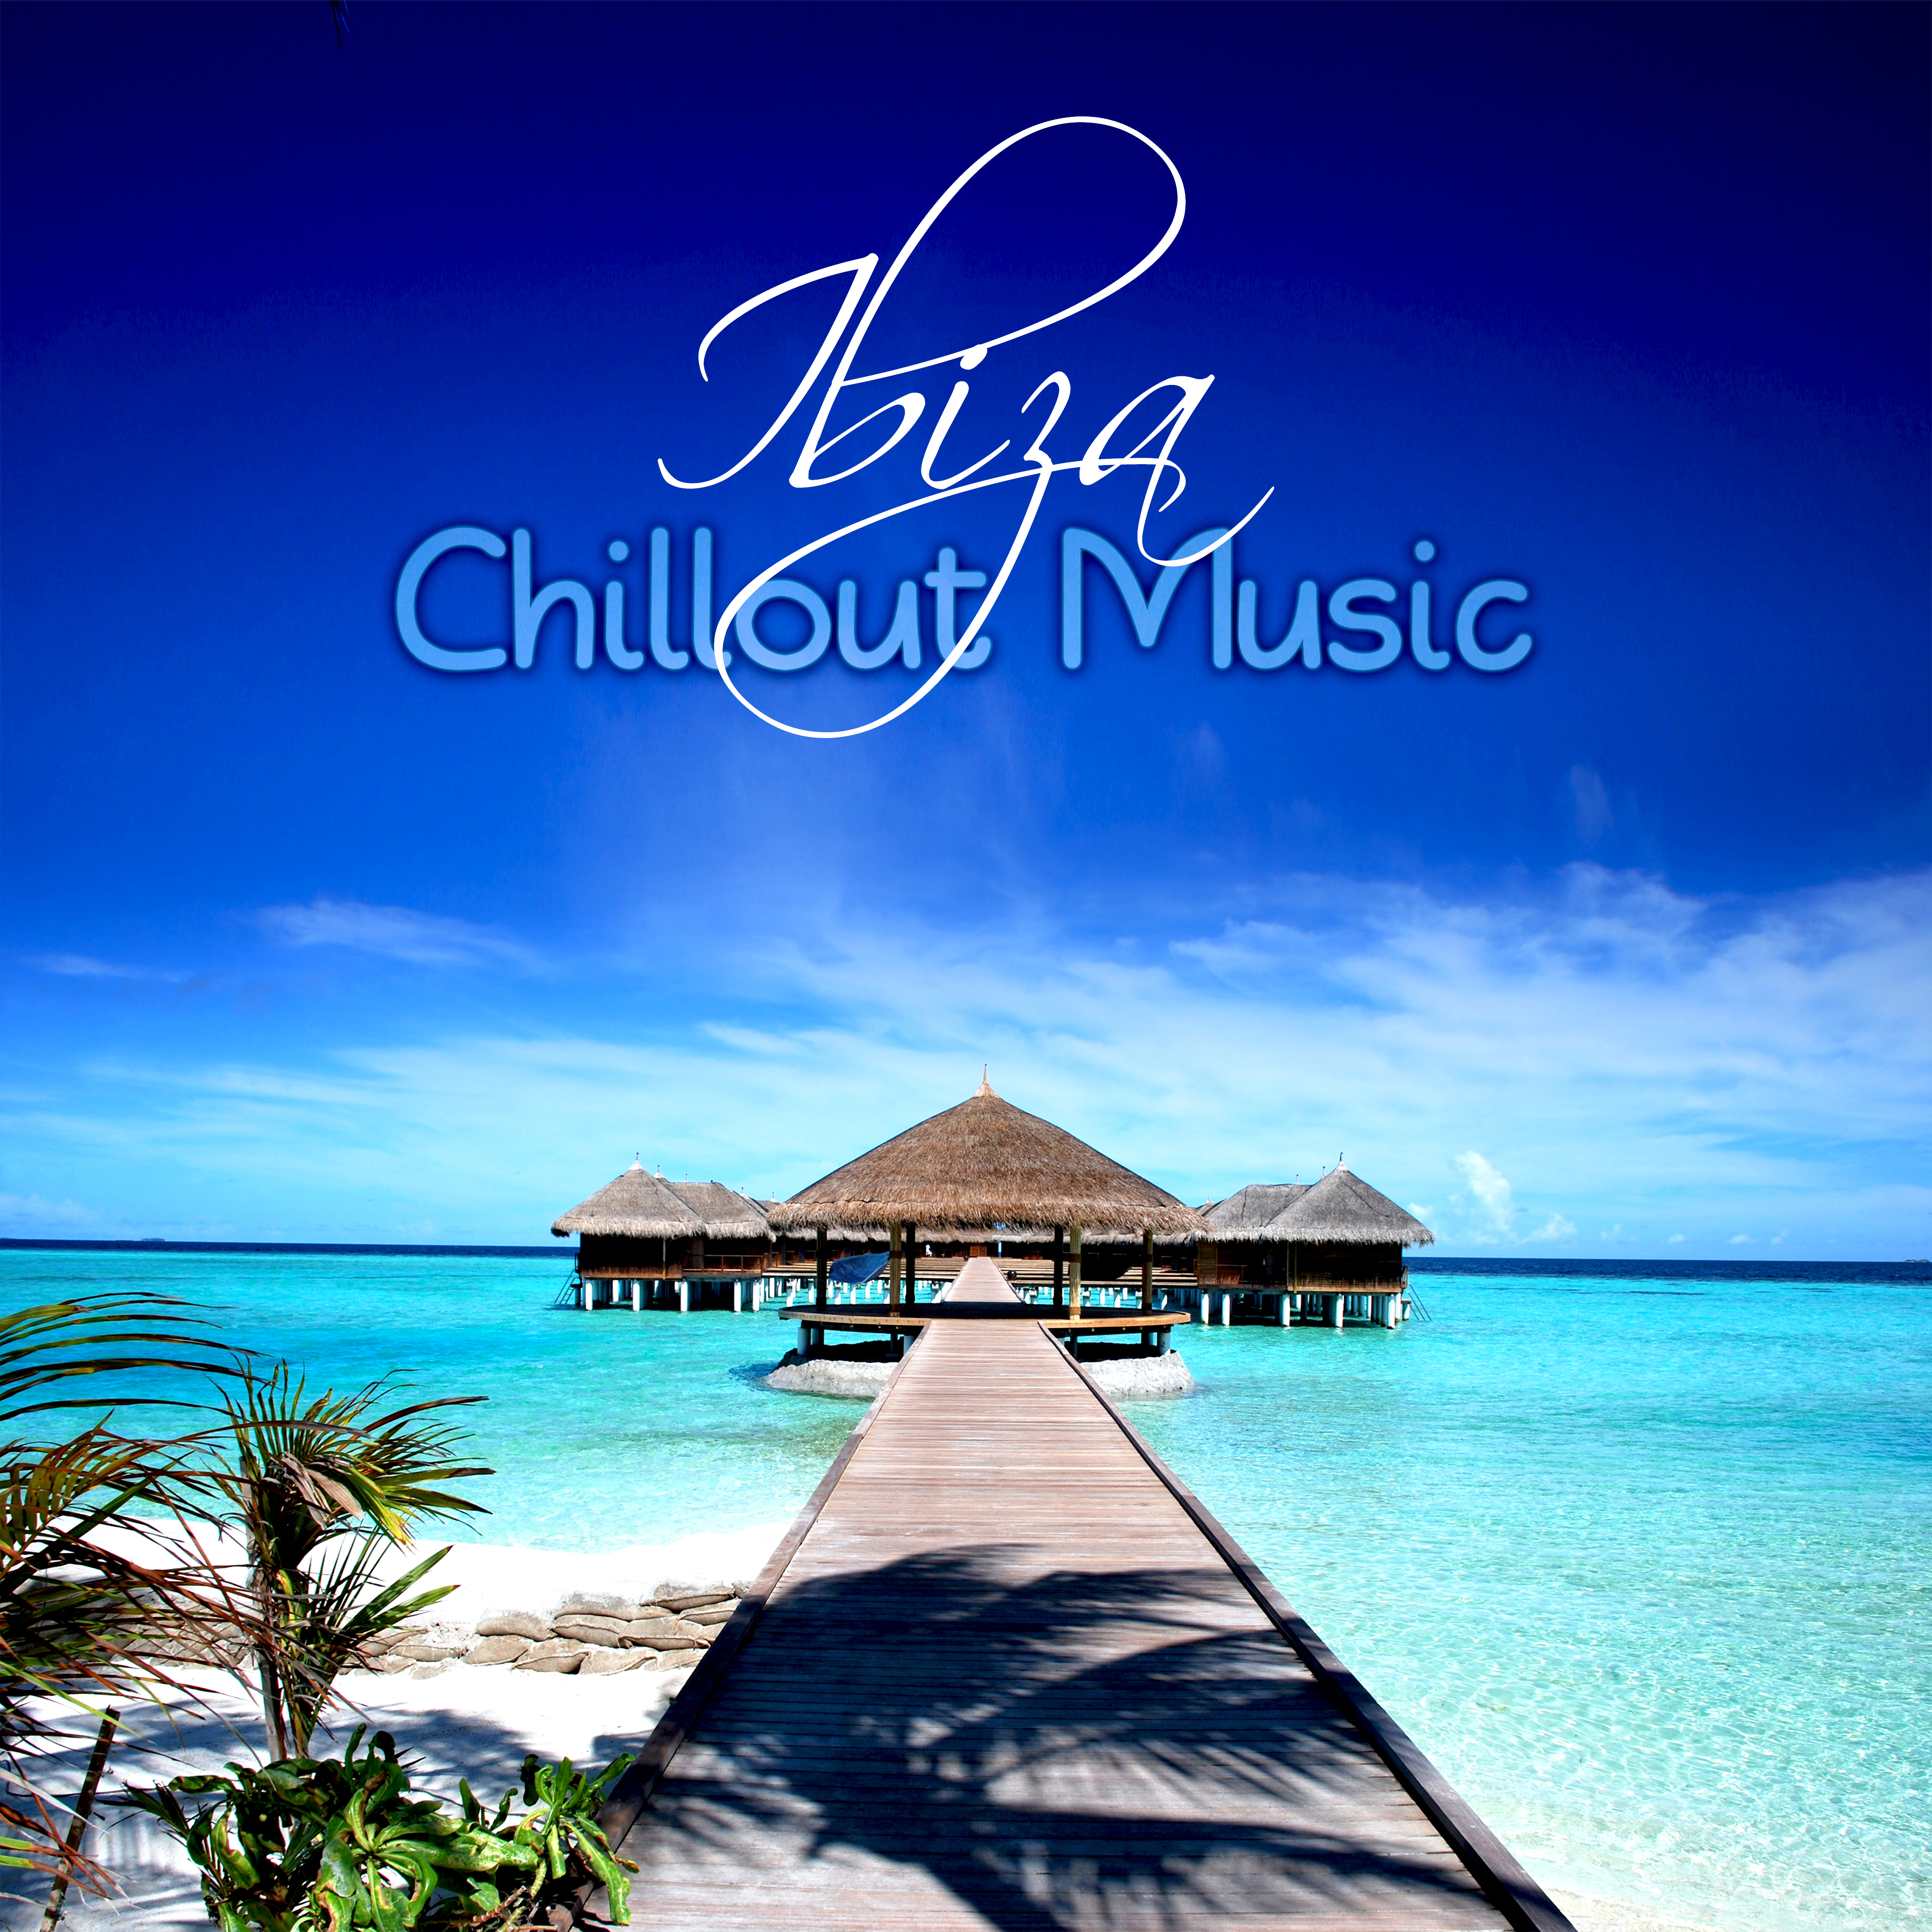 Ibiza Chillout Music  Party Hard, Buddga Lounge, Bar Music, Music to Chill Out, Paradise Island Relaxation